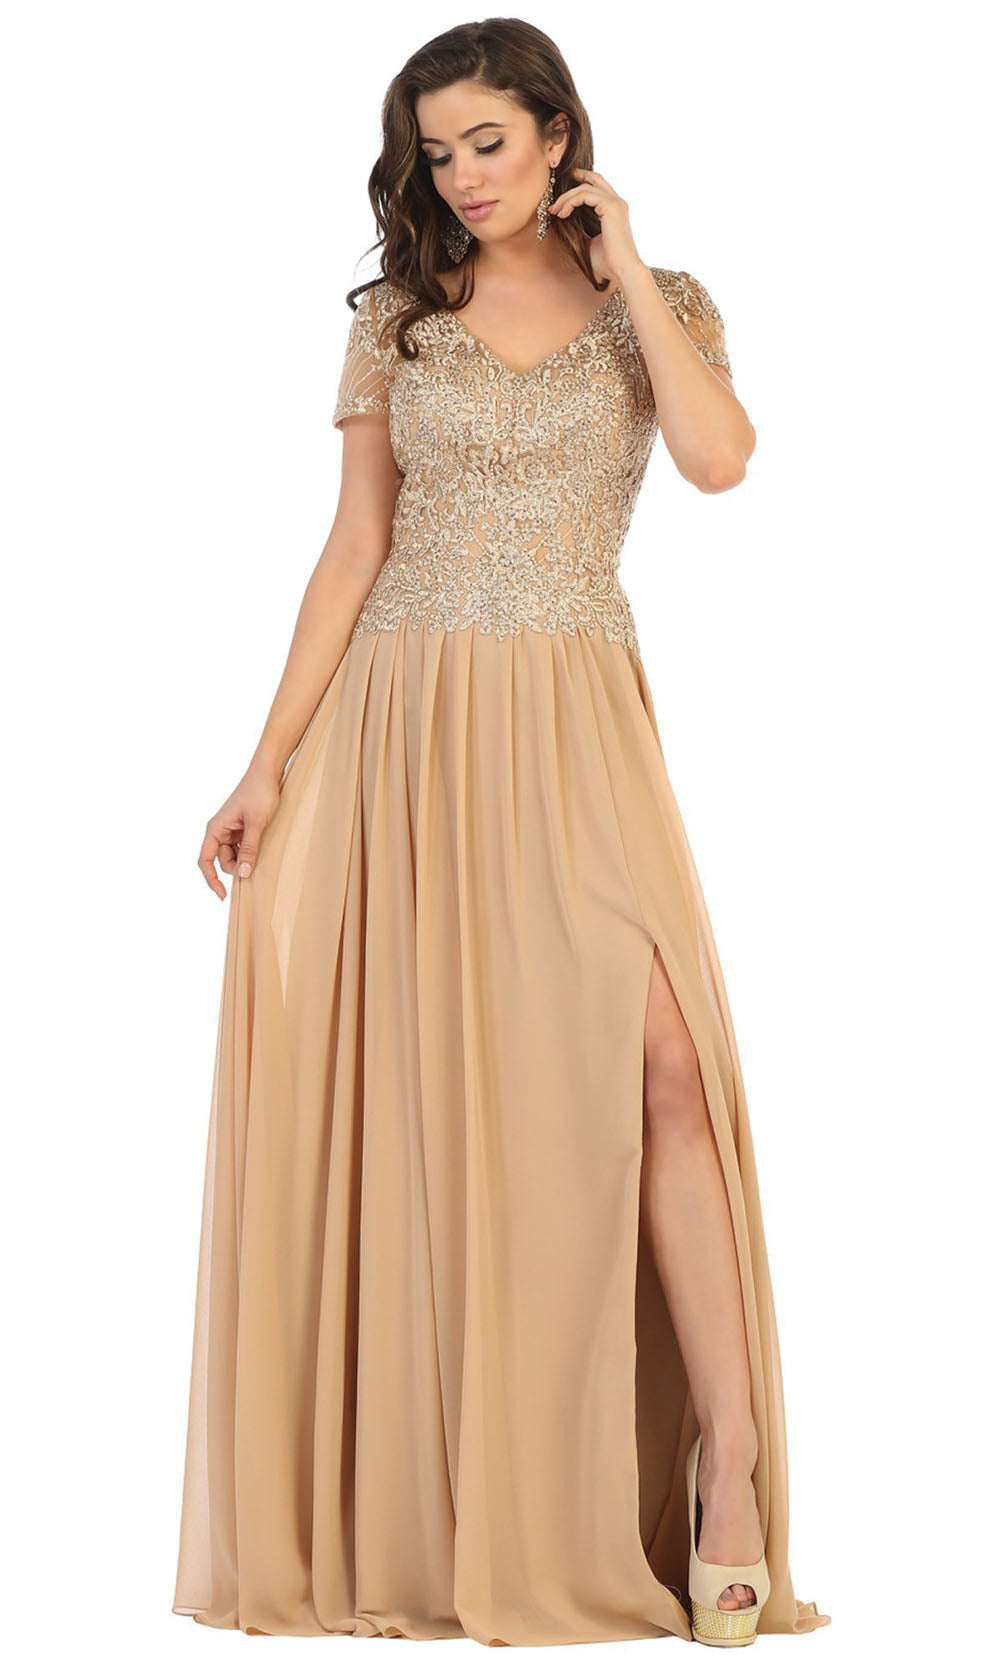 May Queen - MQ1638 Short Sleeve V-Neck A-Line Dress In Gold